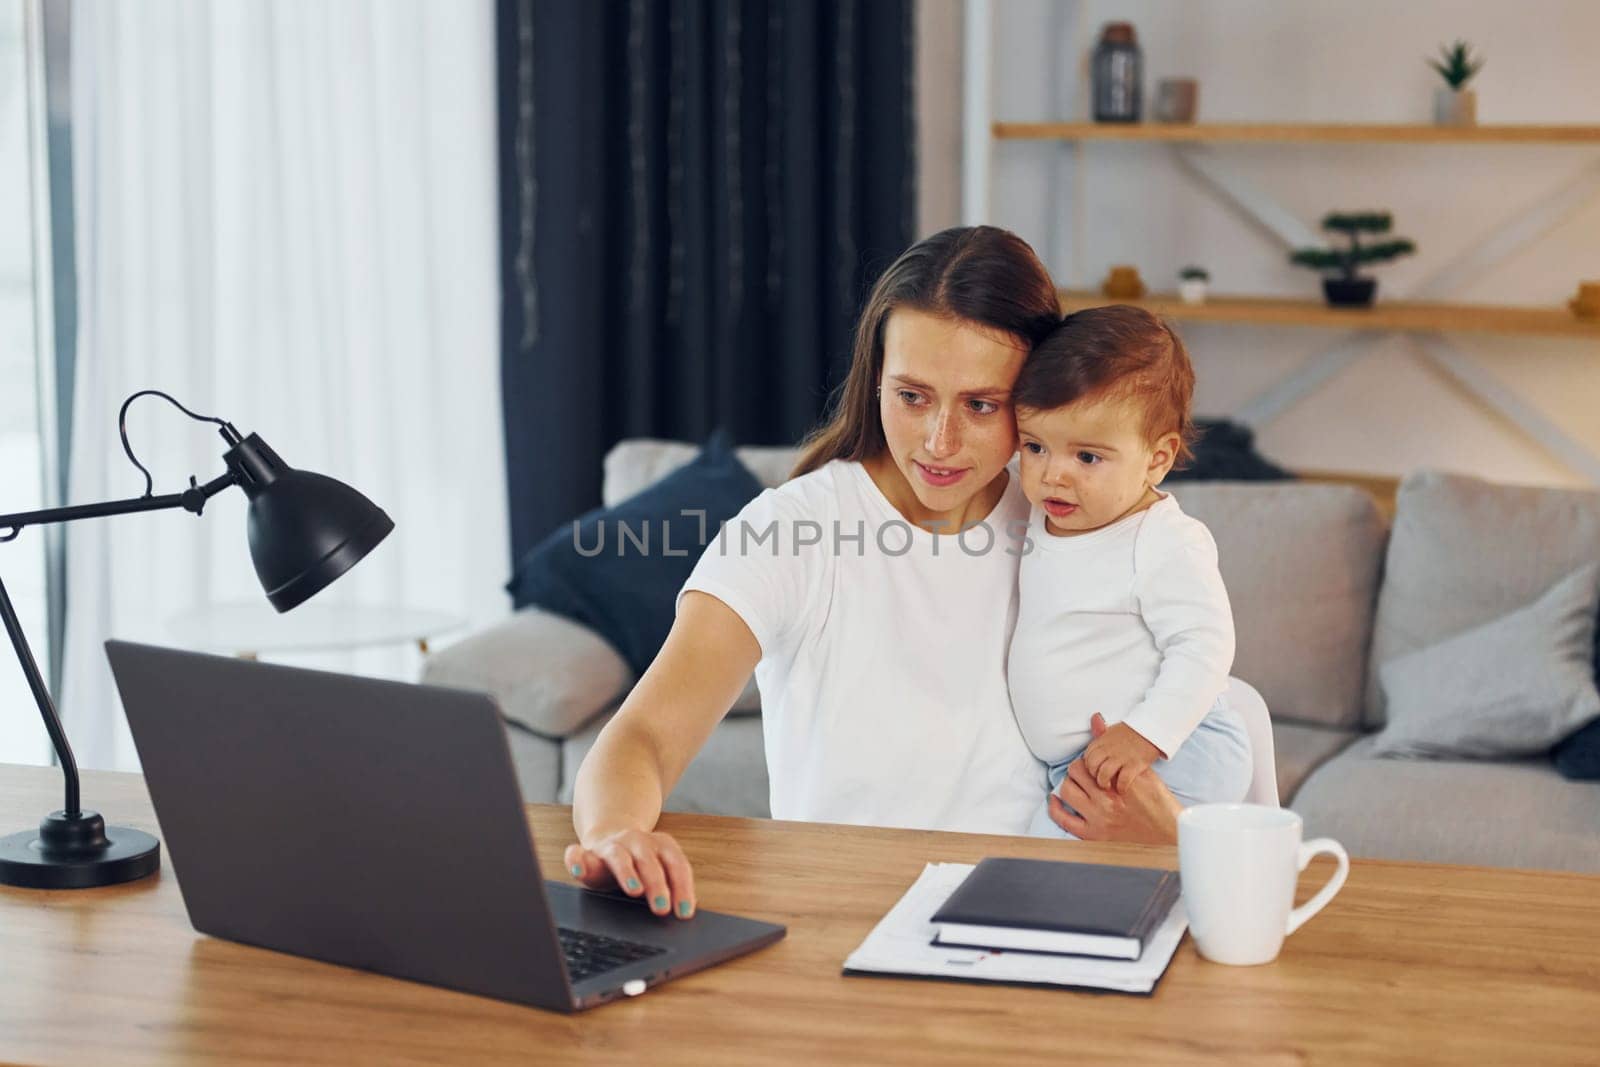 Using laptop. Mother with her little daughter is at home together.